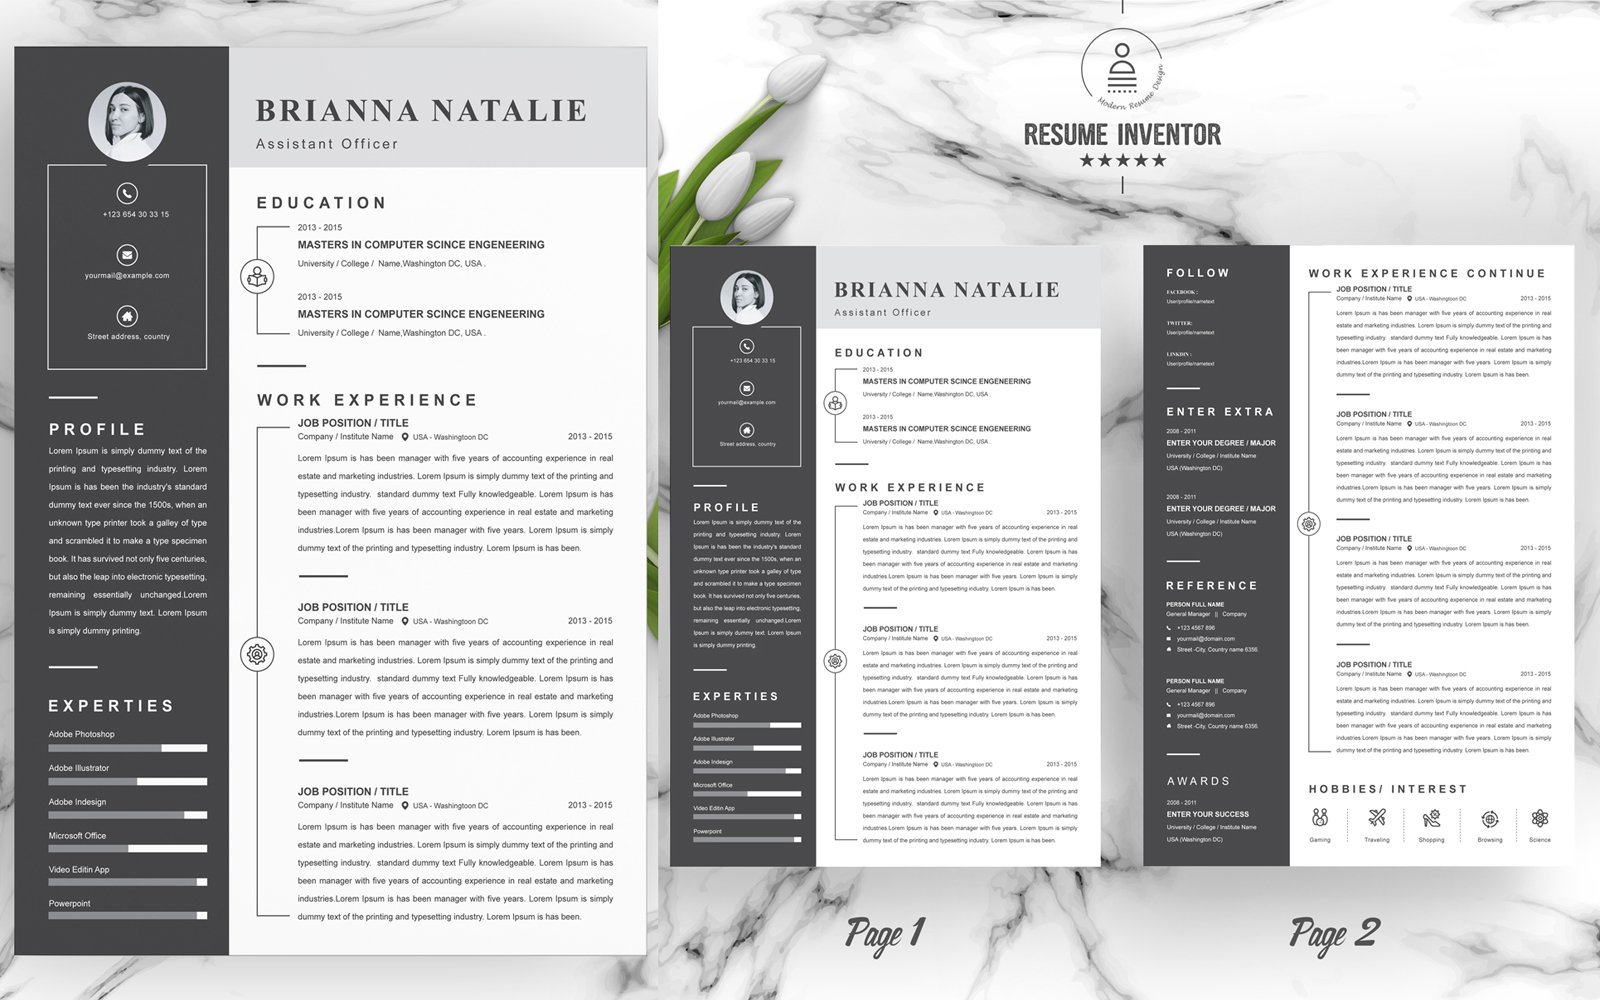 Template #203380 Resume Template Webdesign Template - Logo template Preview